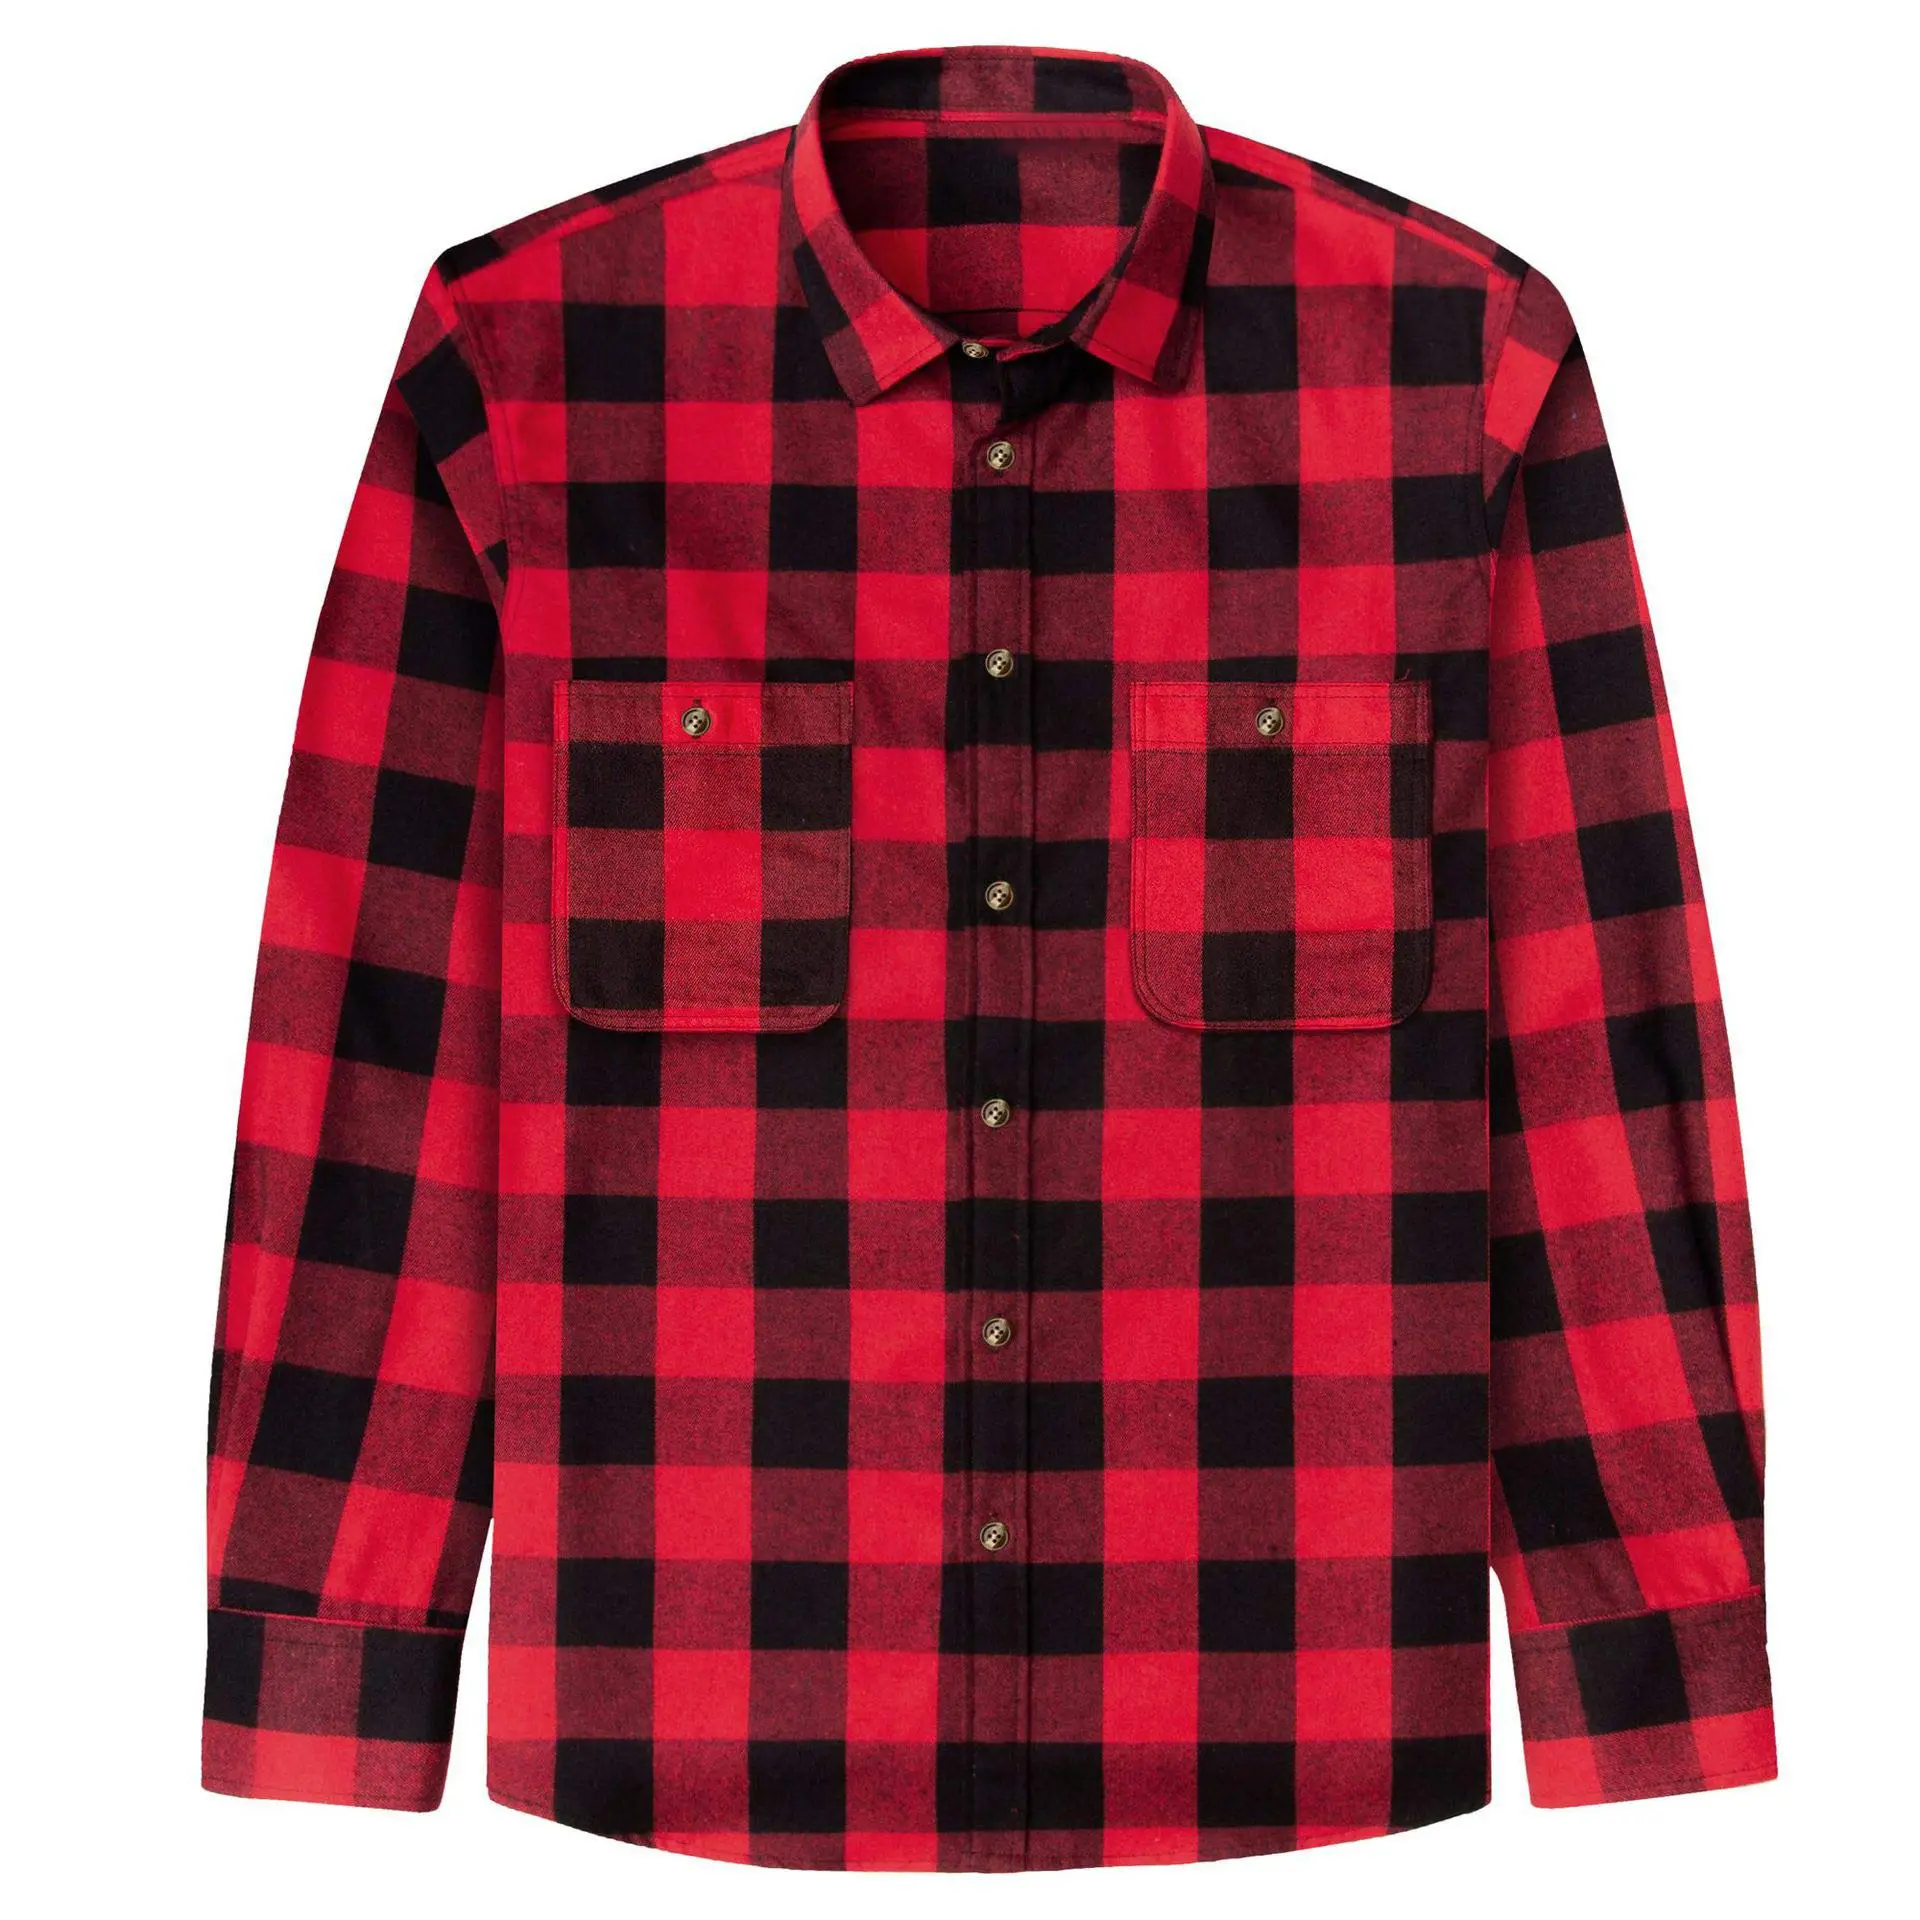 Men's Flannel Plaid Shirts Button Down Regular Fit Long Sleeve Casual Shirts Pure Cotton